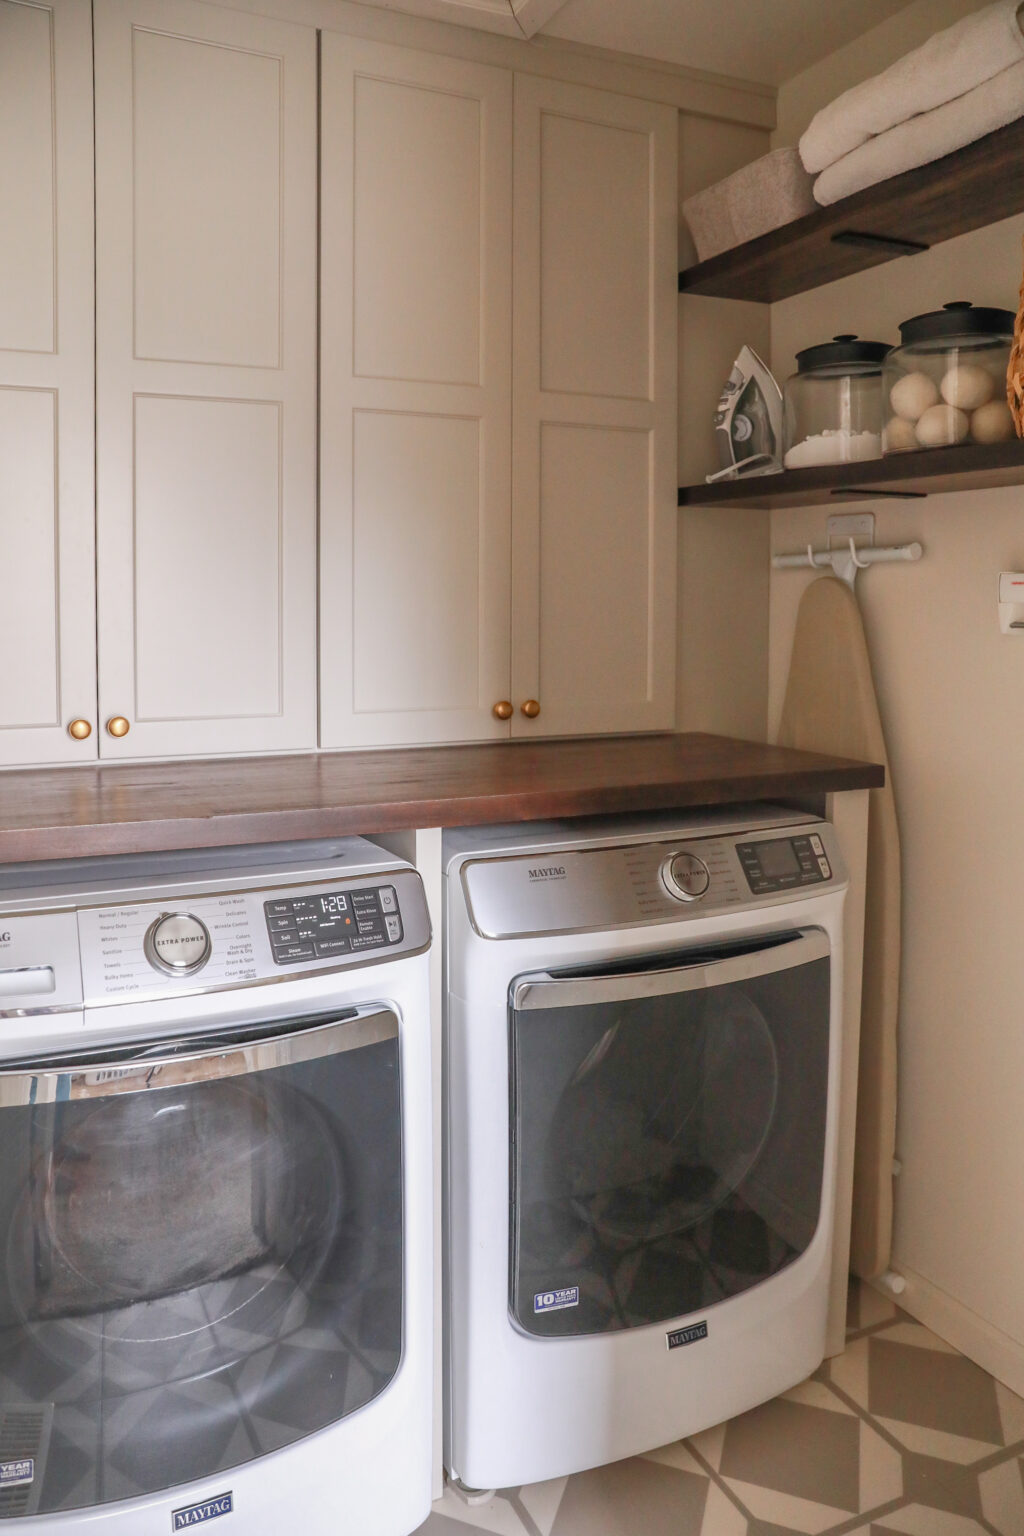 The Maytag Washer and Dryer Set We Chose - In Honor Of Design